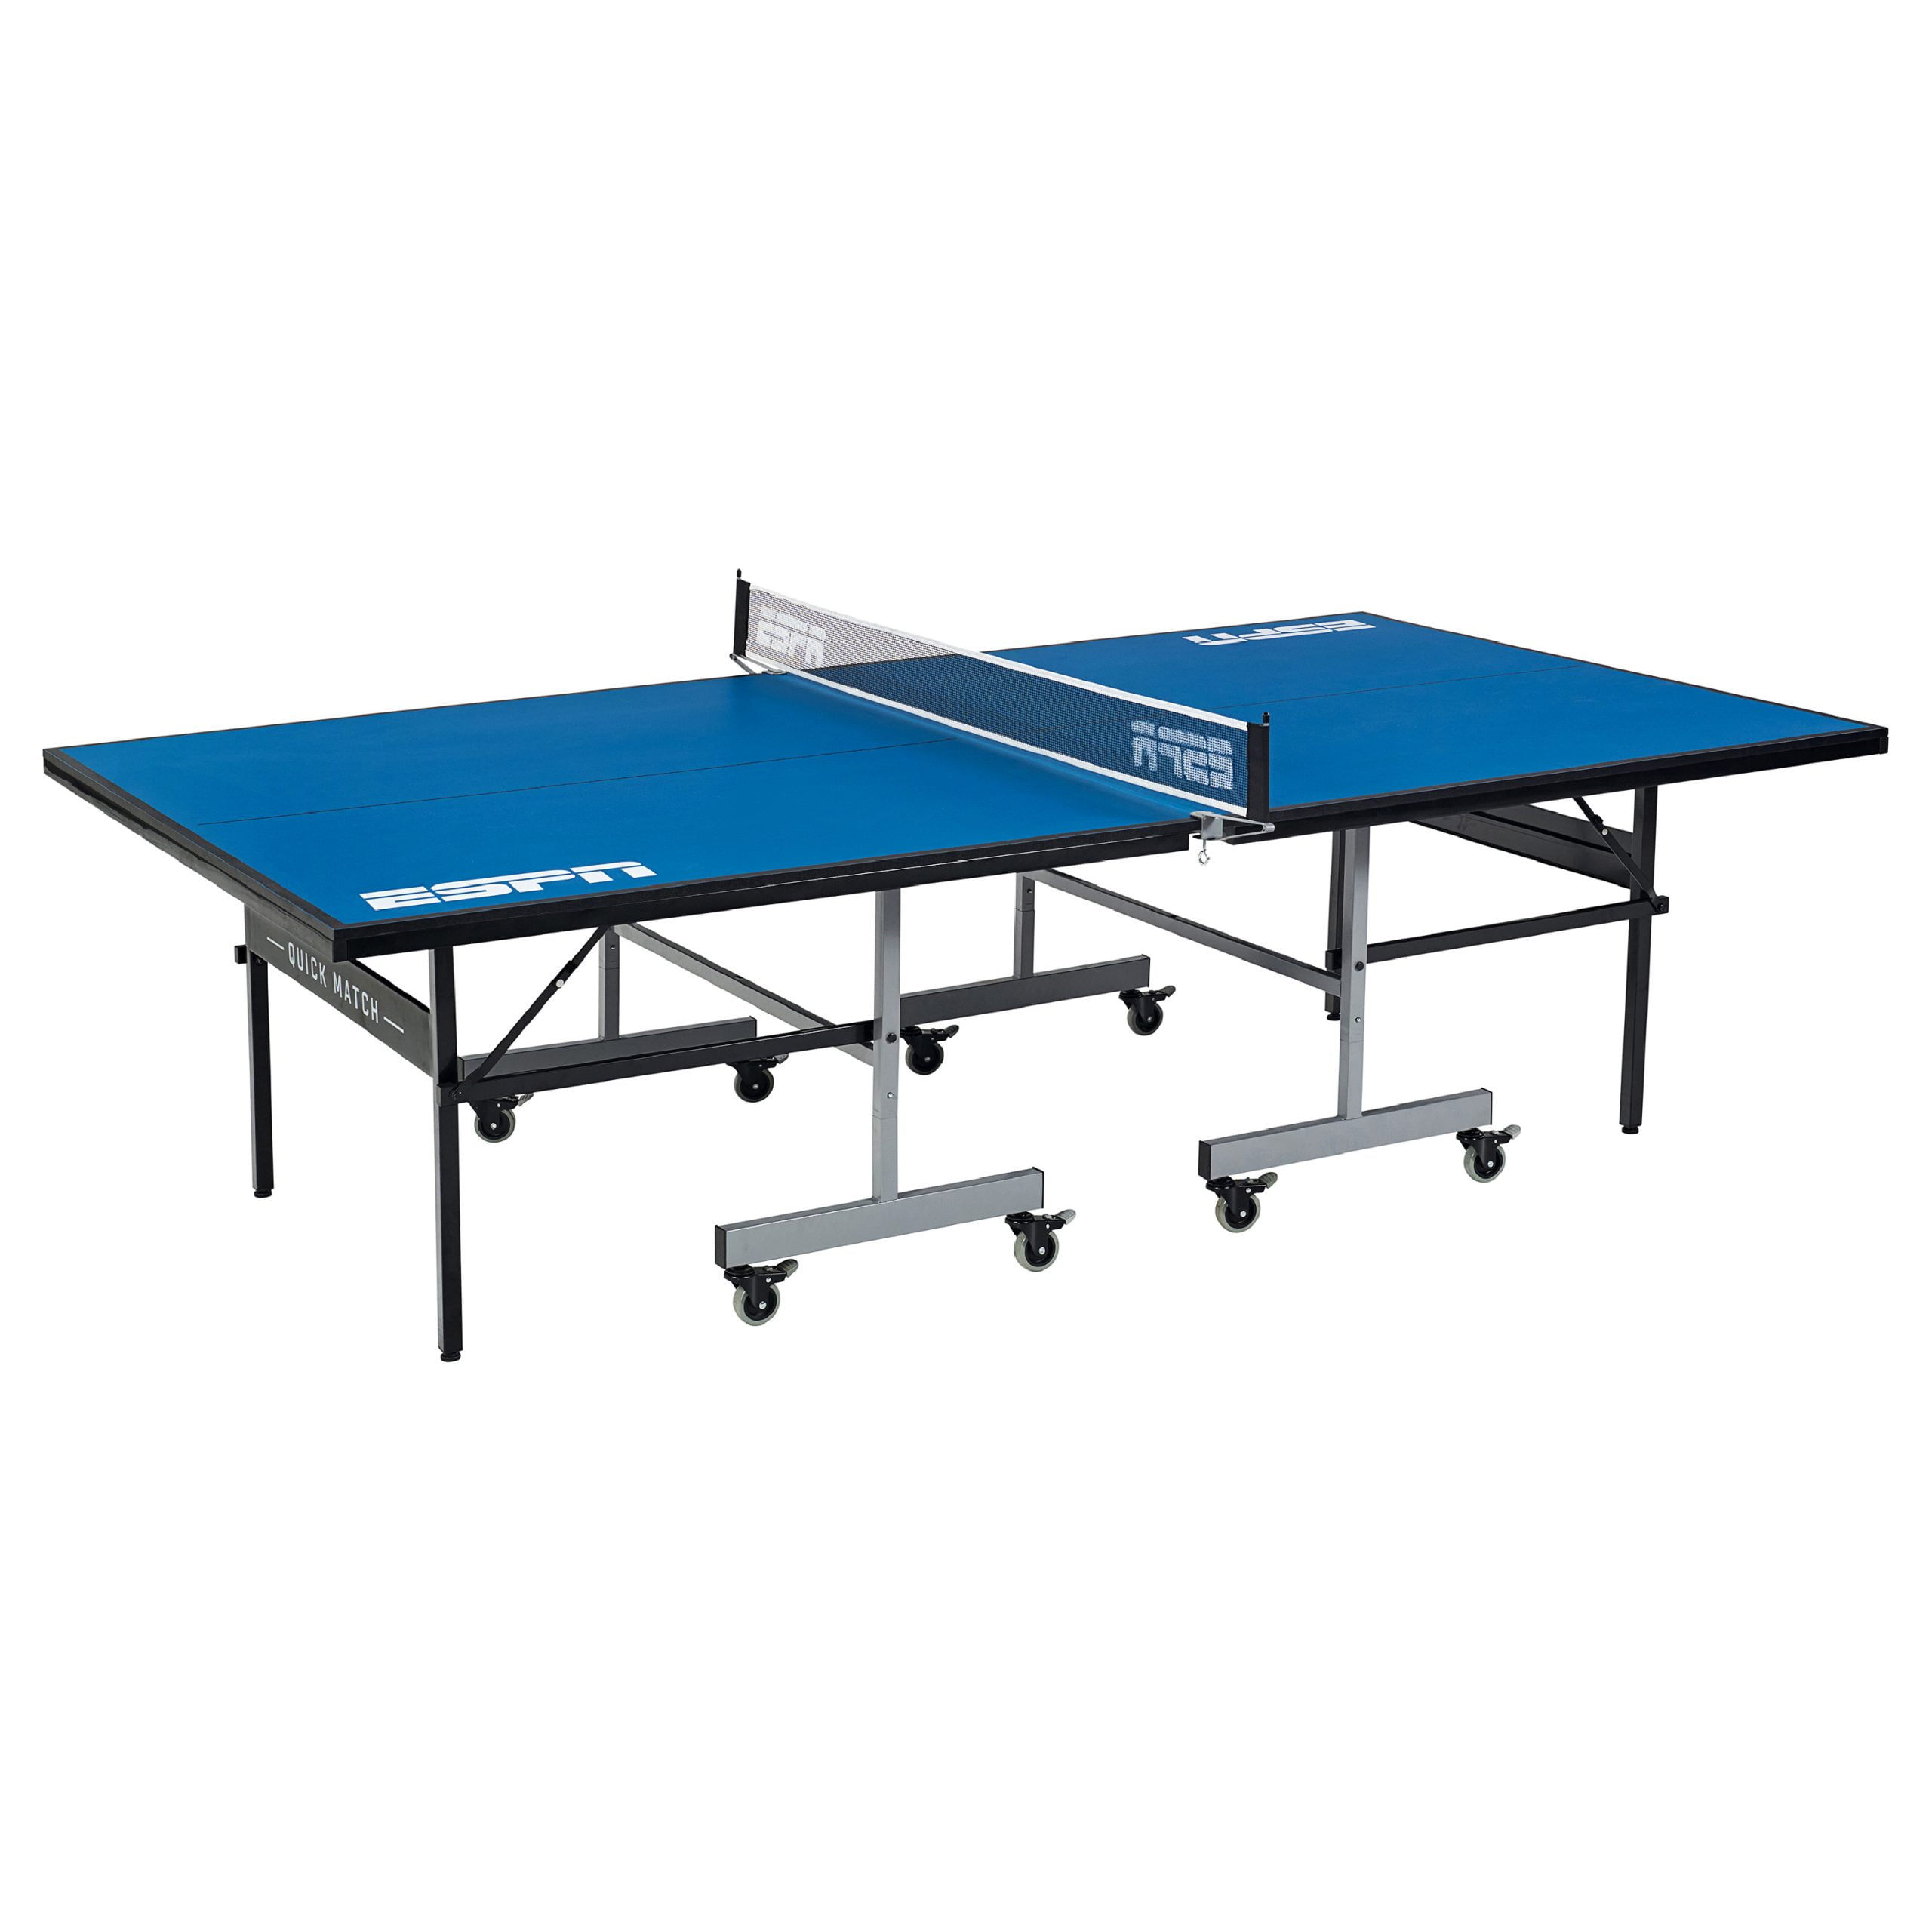 ESPN Official Size Piece 15mm Indoor Quick Match Table Tennis Table, Blue 